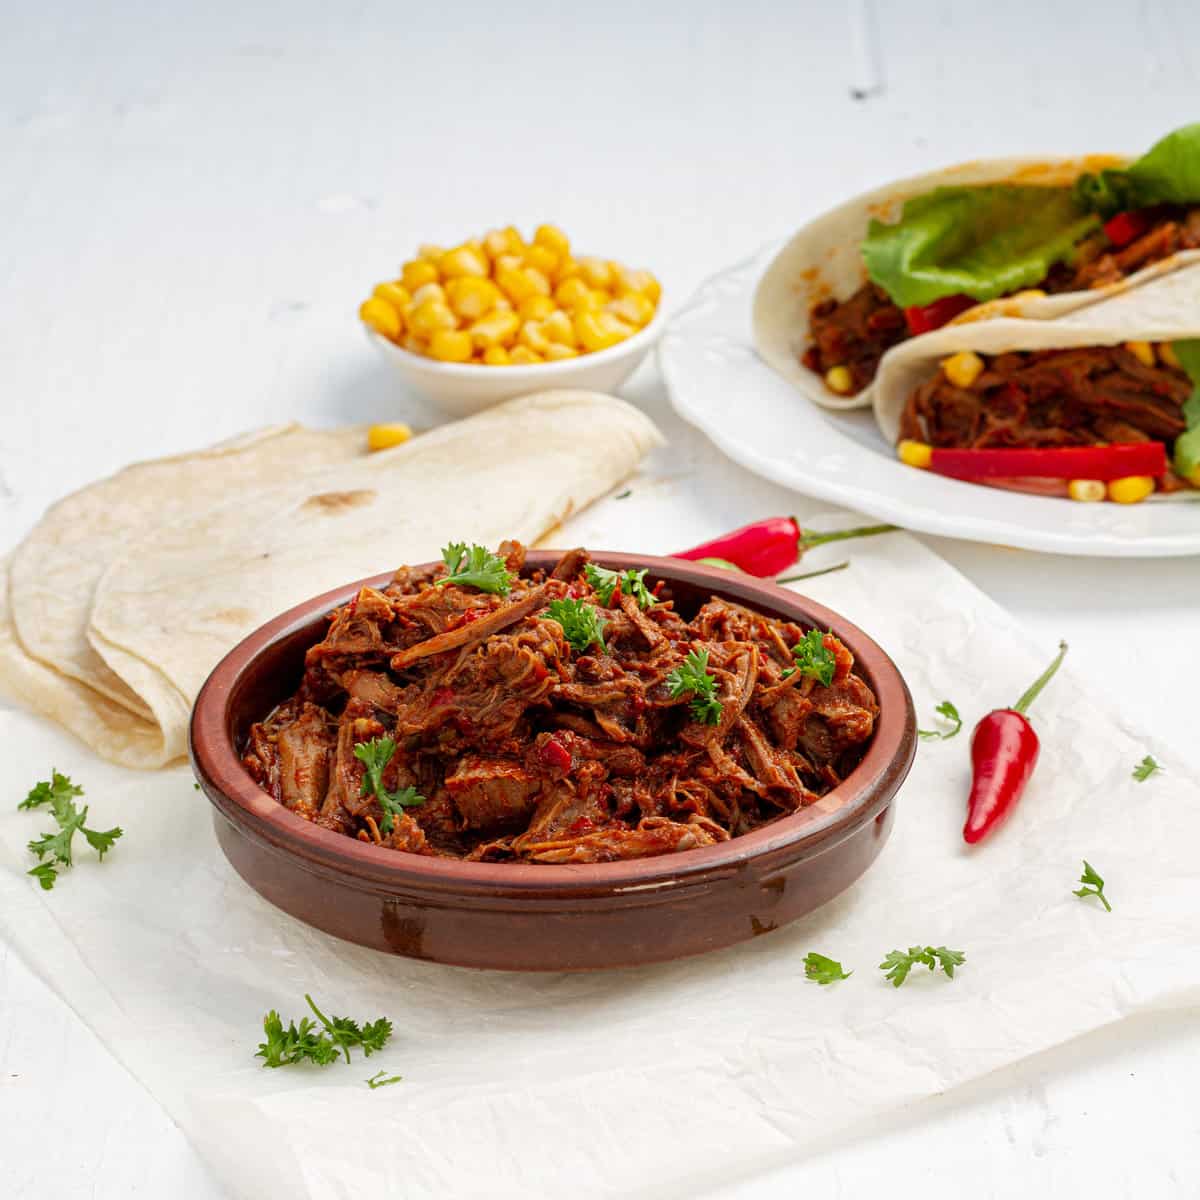 Instant Pot Birria served with chilies and tortillas